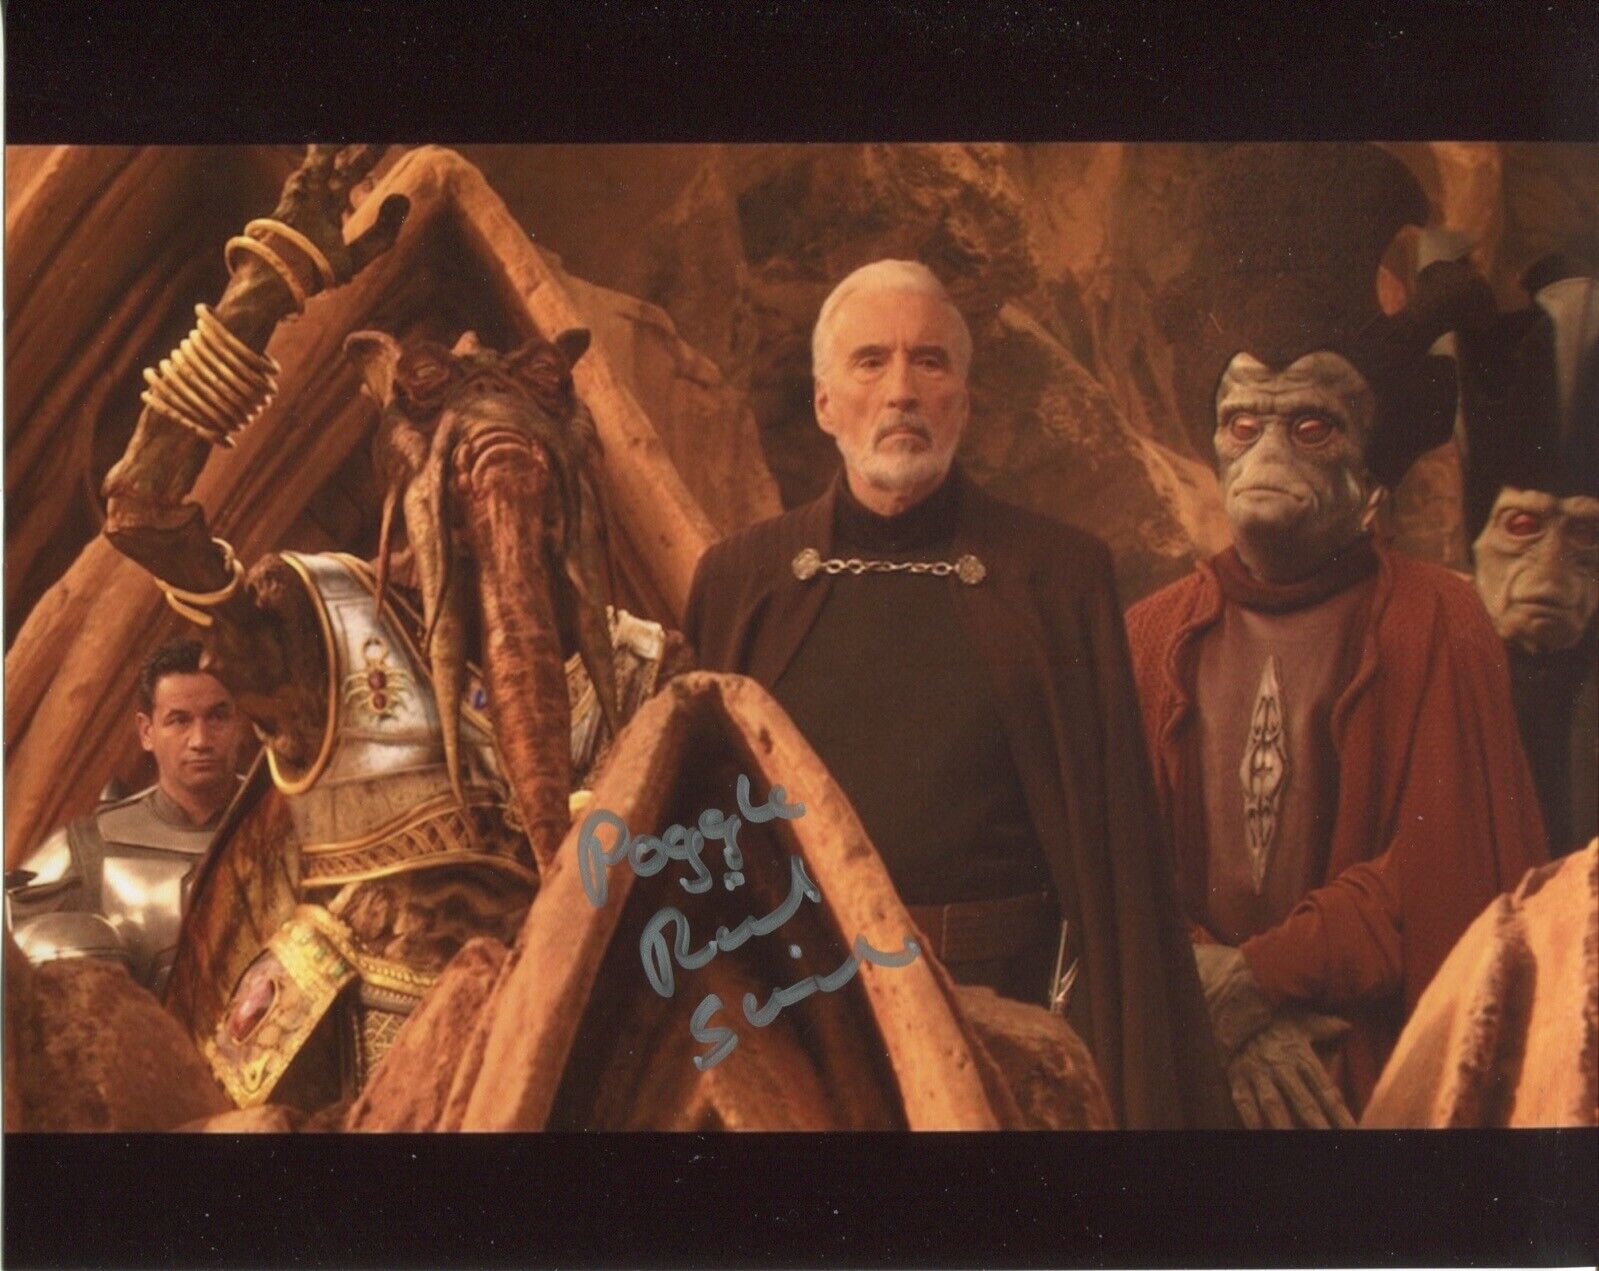 Star Wars Revenge of the Sith actor Richard Stride signed 8x10 Photo Poster painting